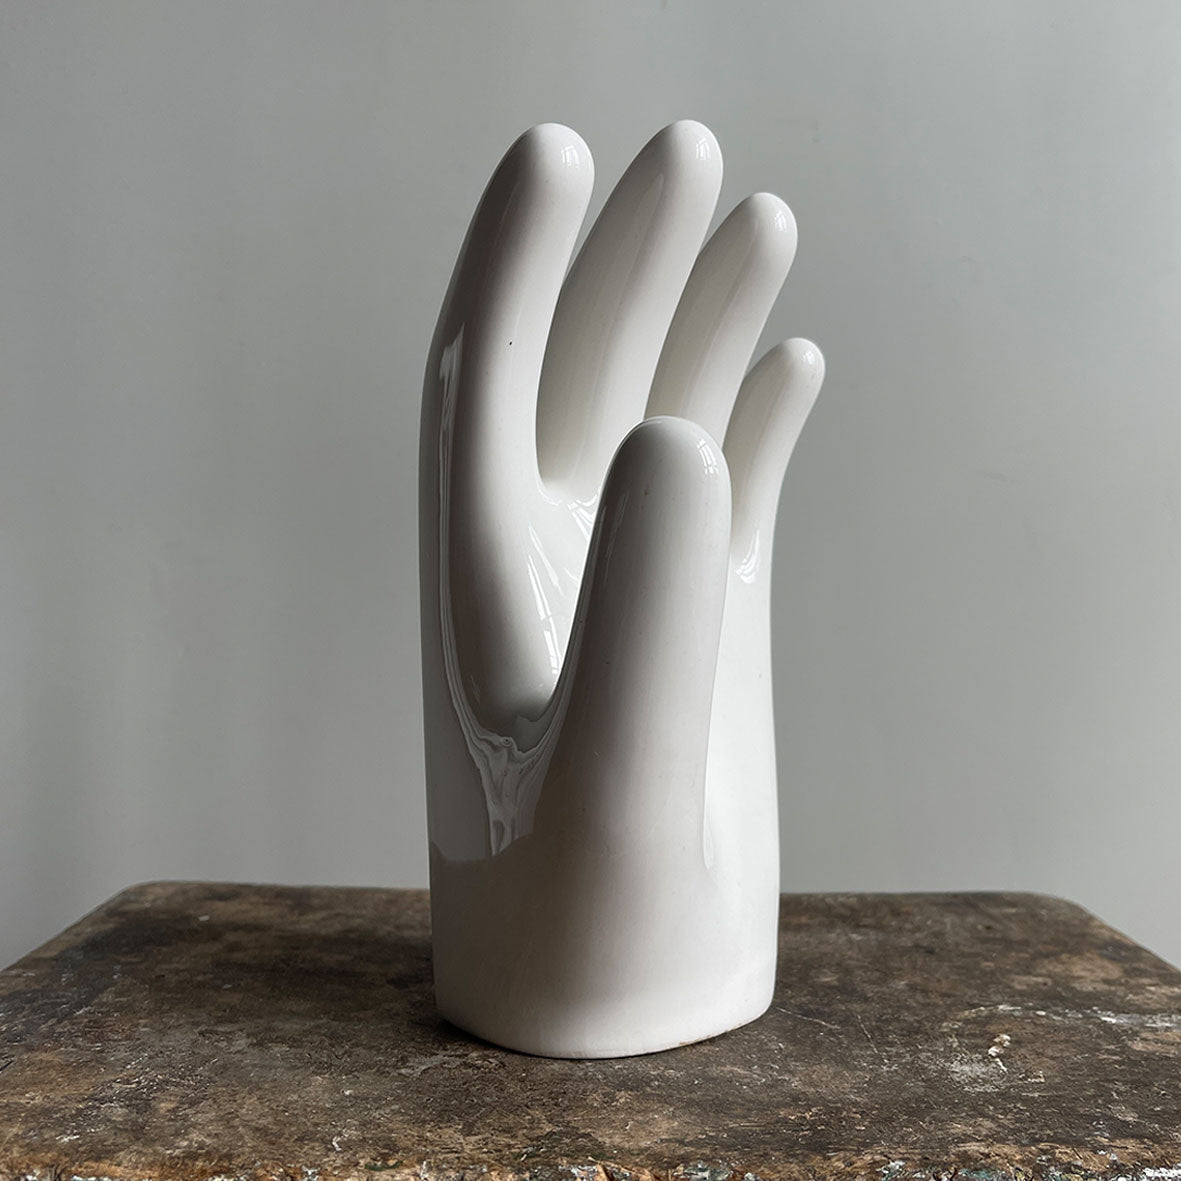 A sculptural Factory Glove Mould. Finished in a white glaze and stamped '300359 10' and 'AGH' printed in blue numerals to the front. In perfect condition - SHOP NOW - www.intovintage.co.uk